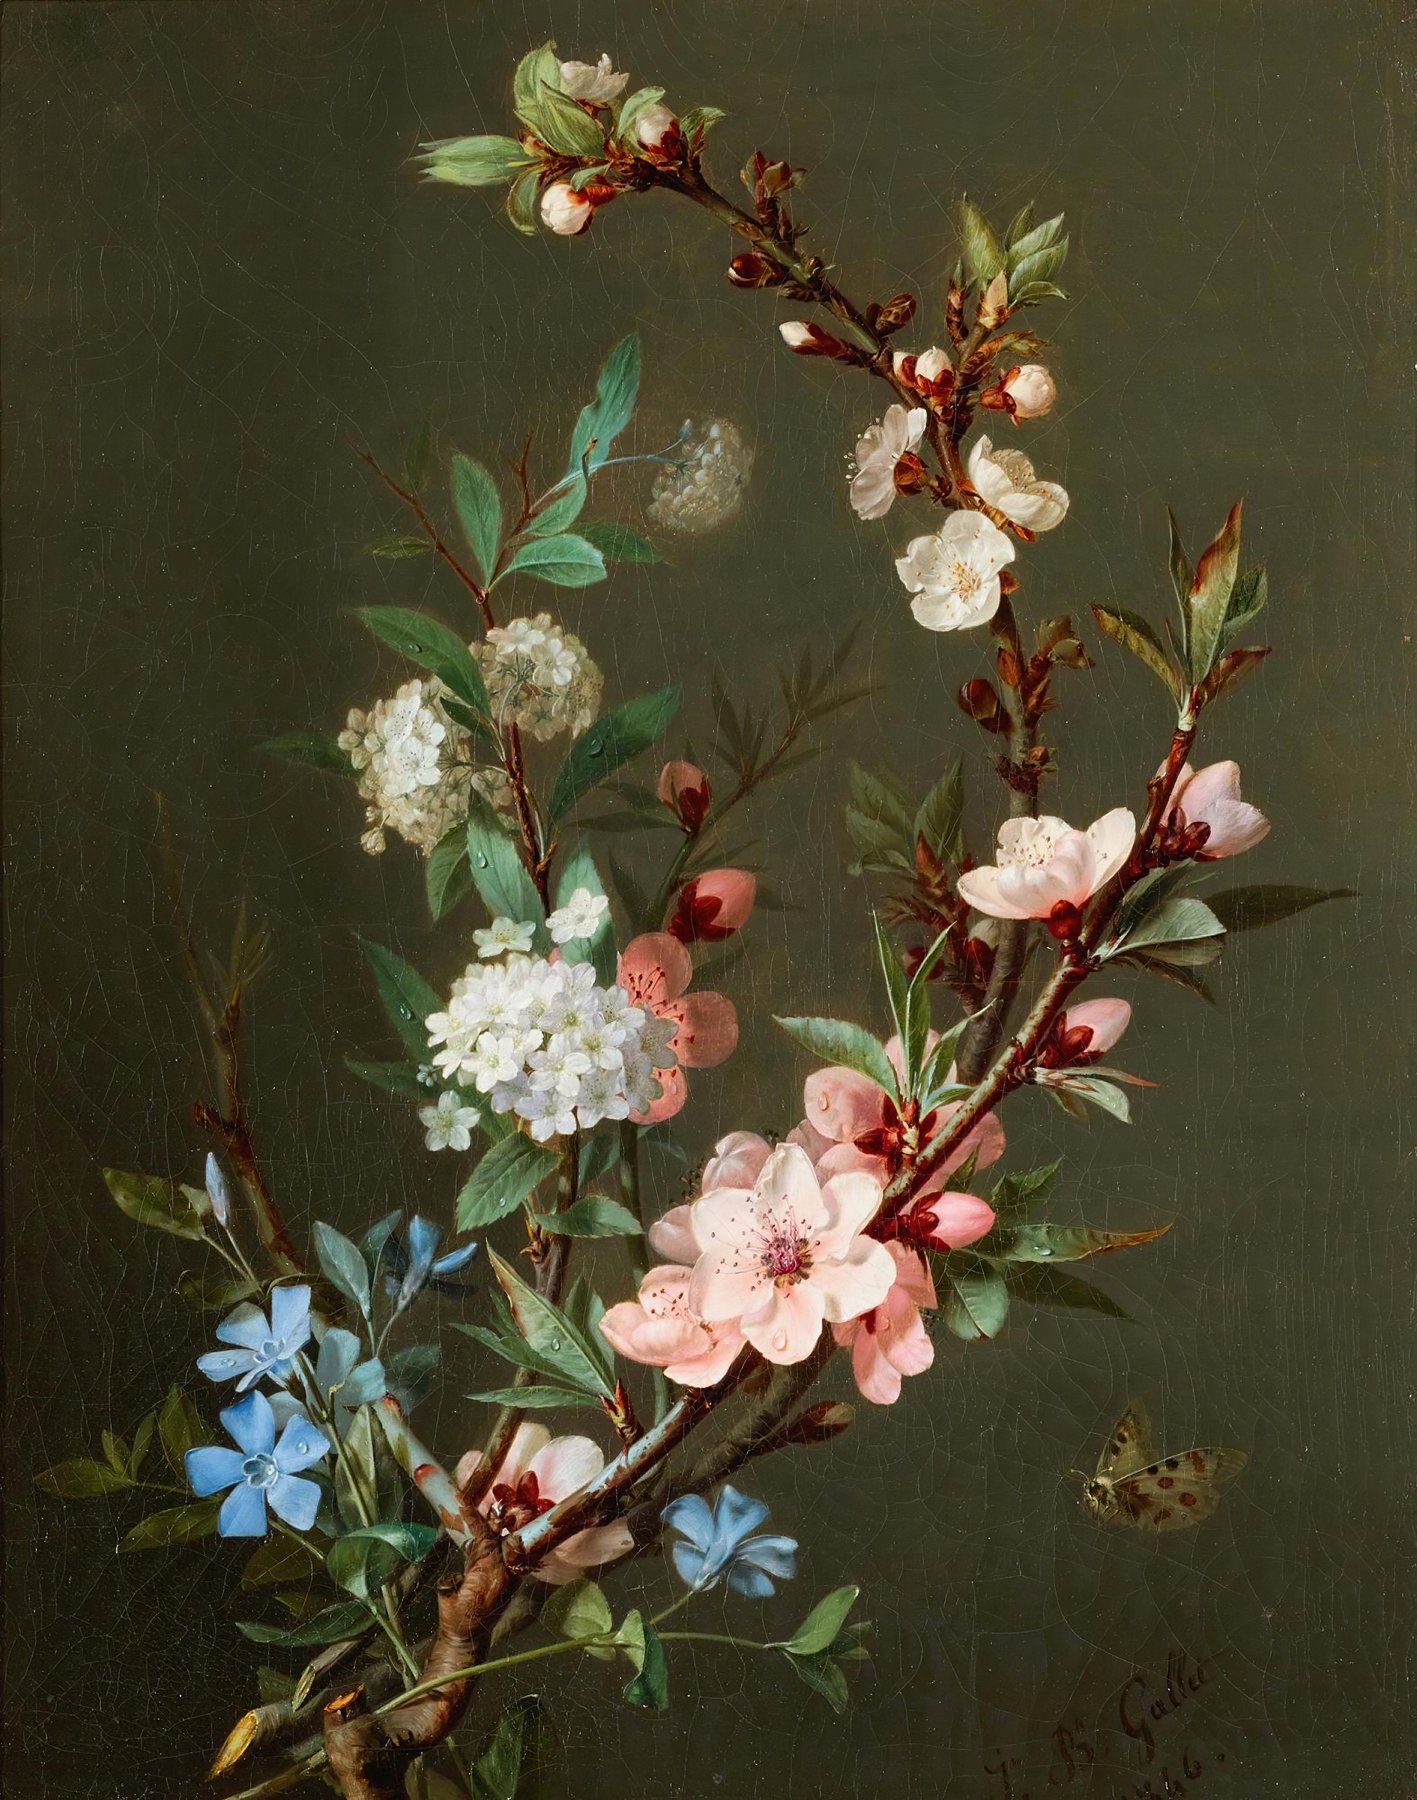 A Still Life With Branches Of Cherry Blossom, Periwinkle And Viburnum Together With A Butterfly